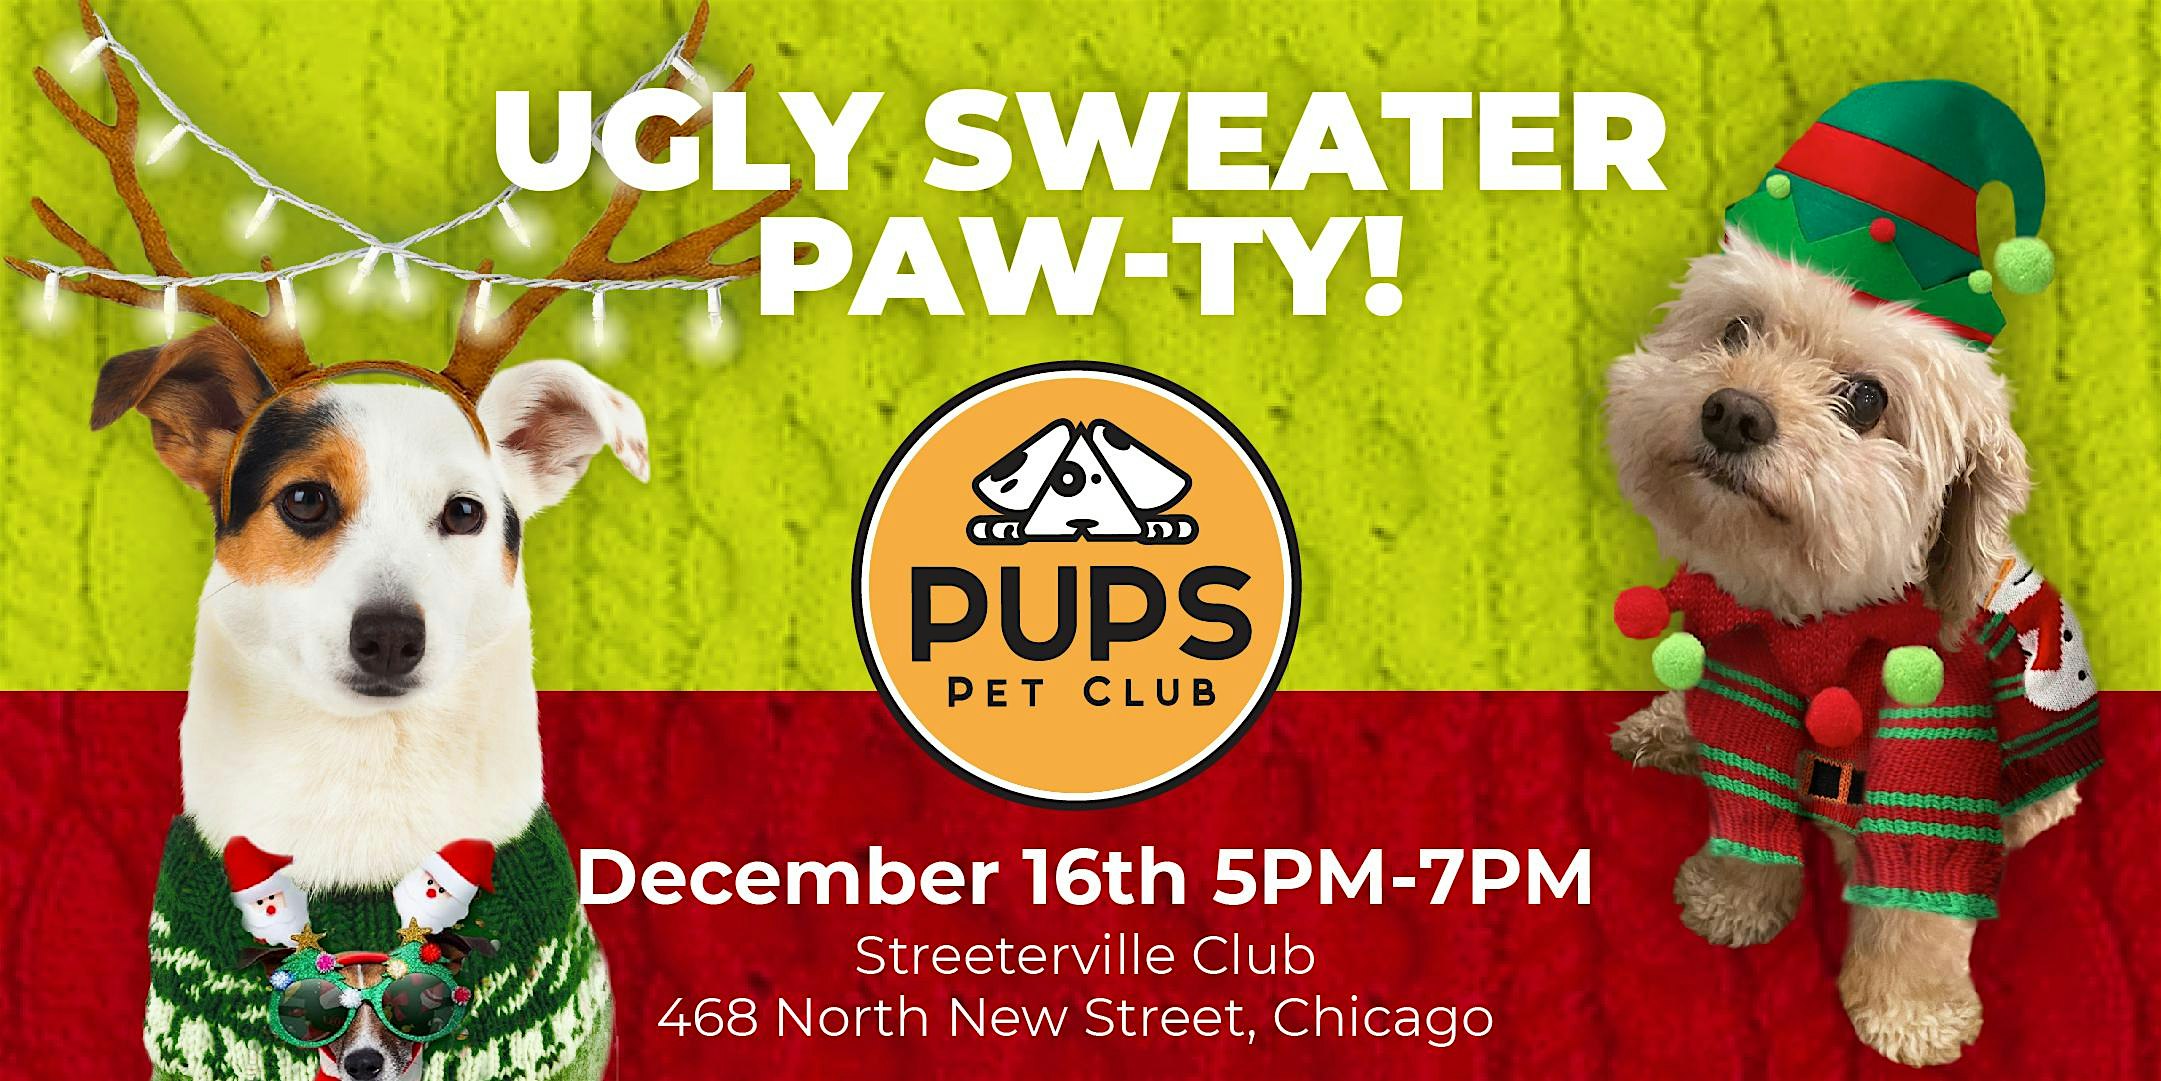 PUPS UGLY HOLIDAY SWEATER PAWTY